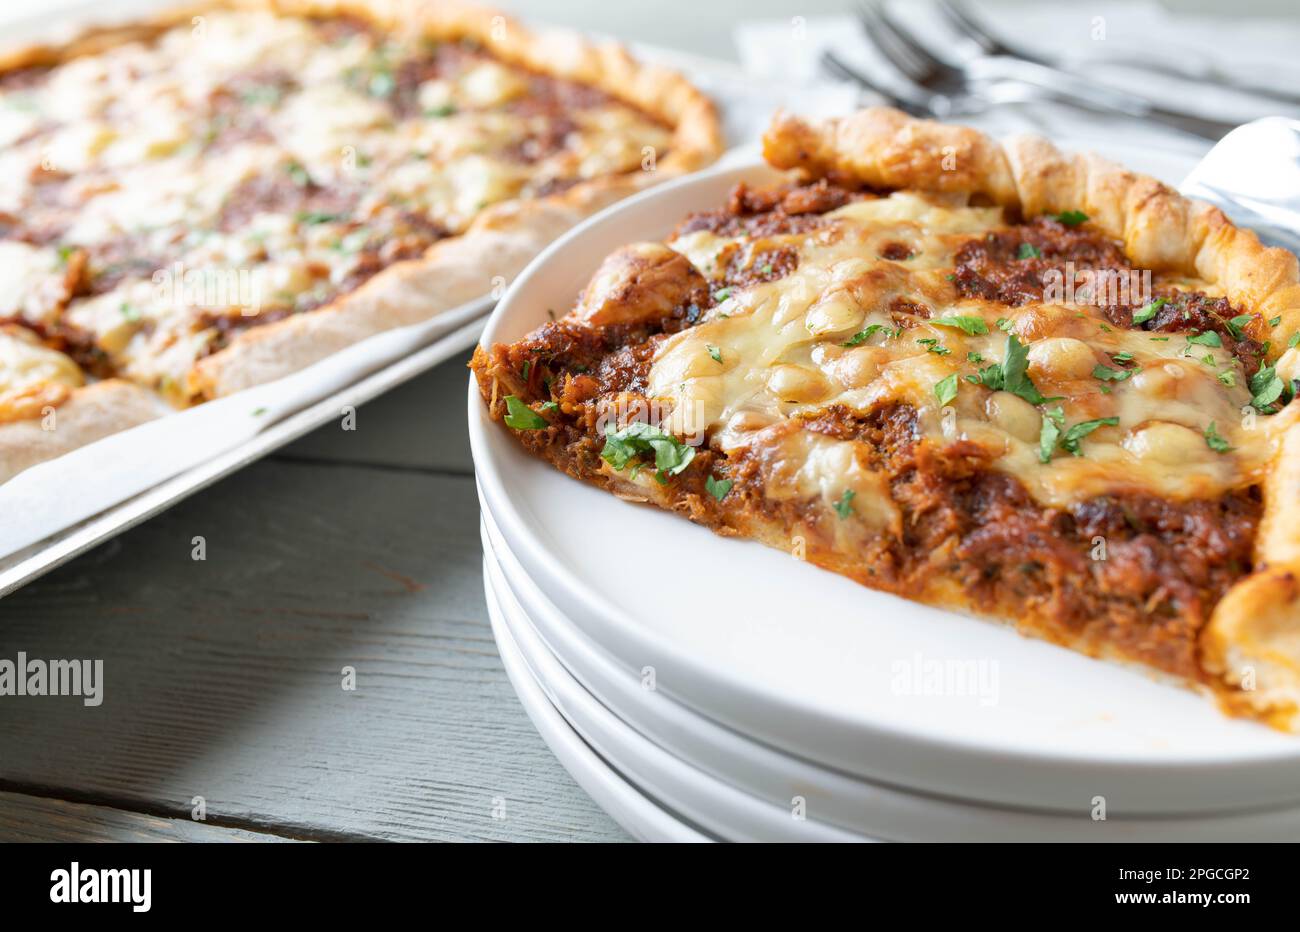 Pizza with stewed meat and melted cheese topping. Delicious leftover meal Stock Photo